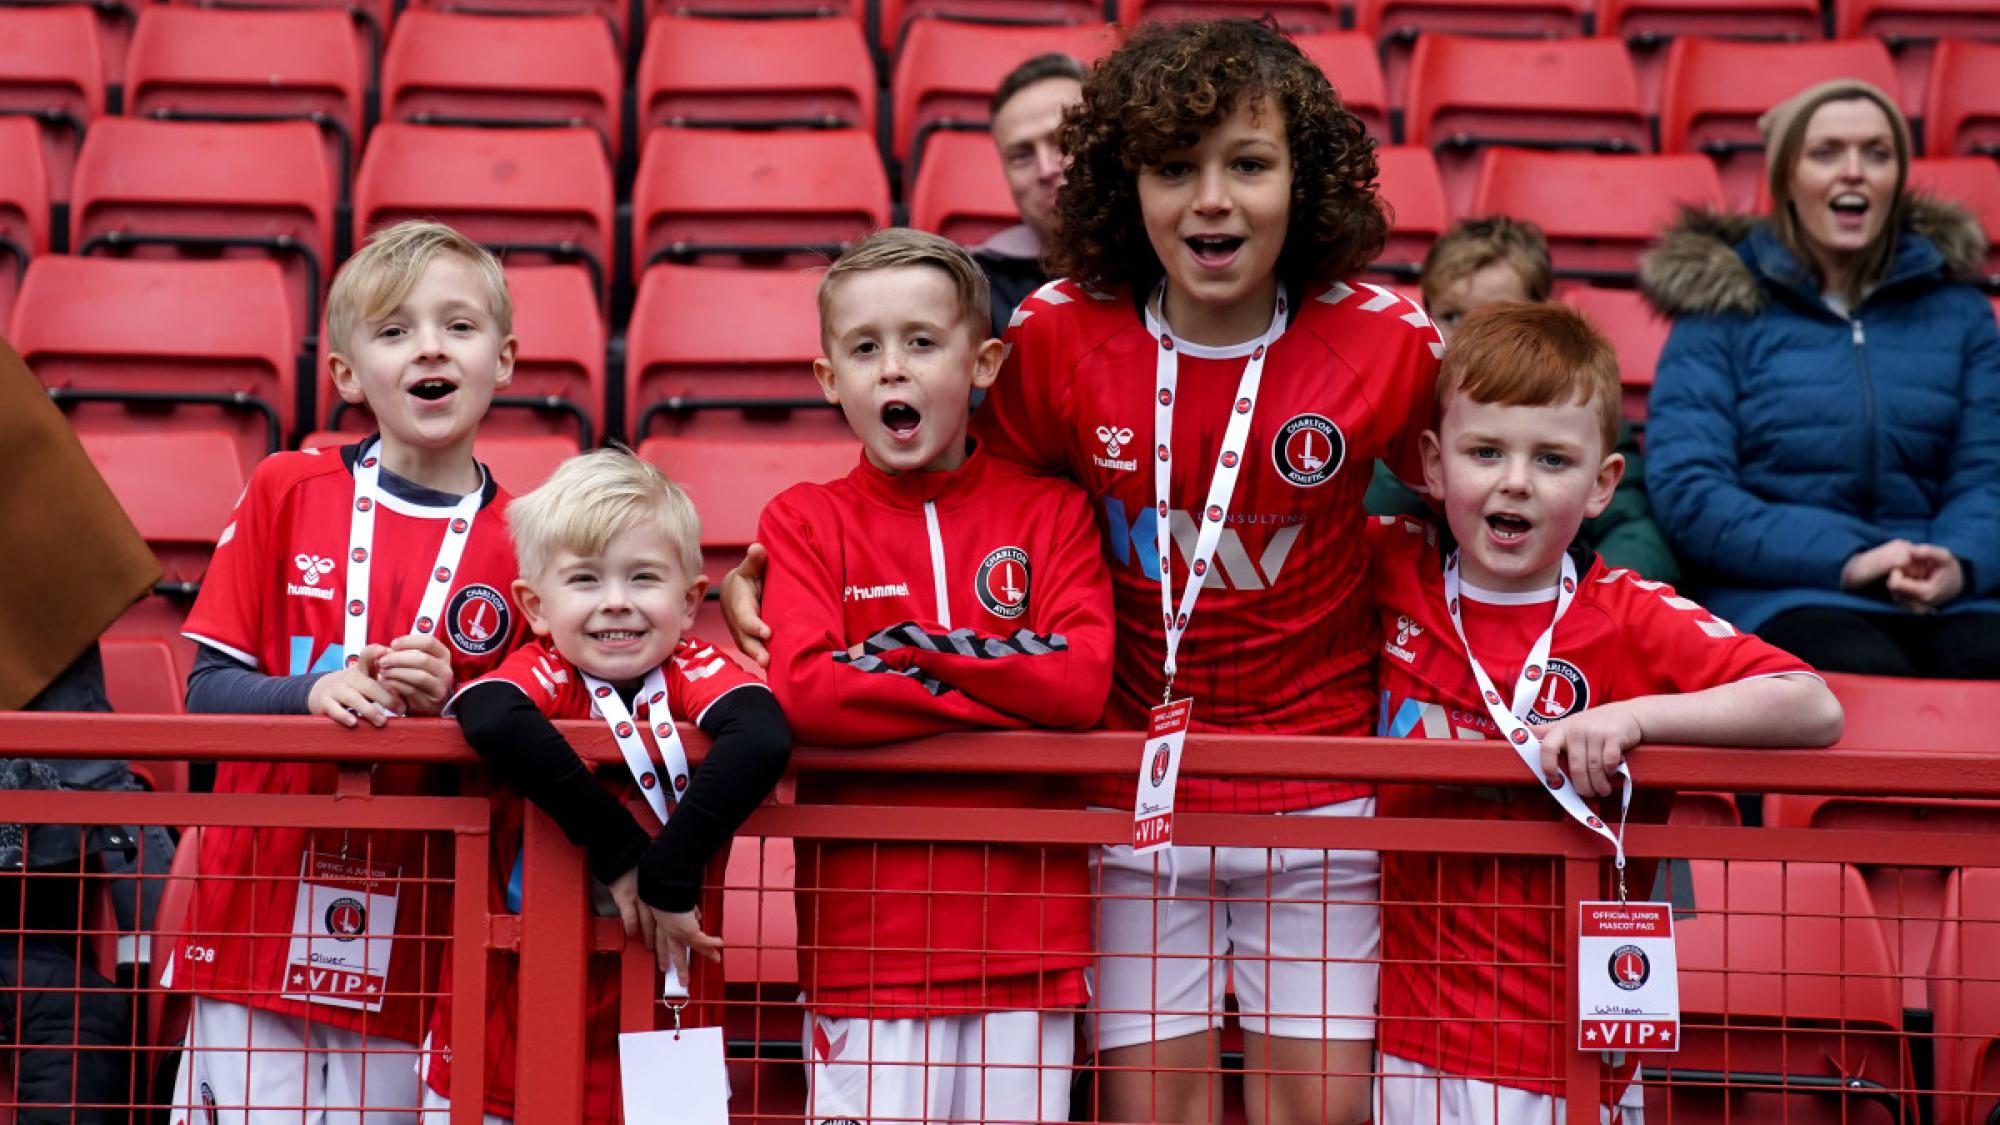 Junior mascots in The Valley's West Stand on matchday